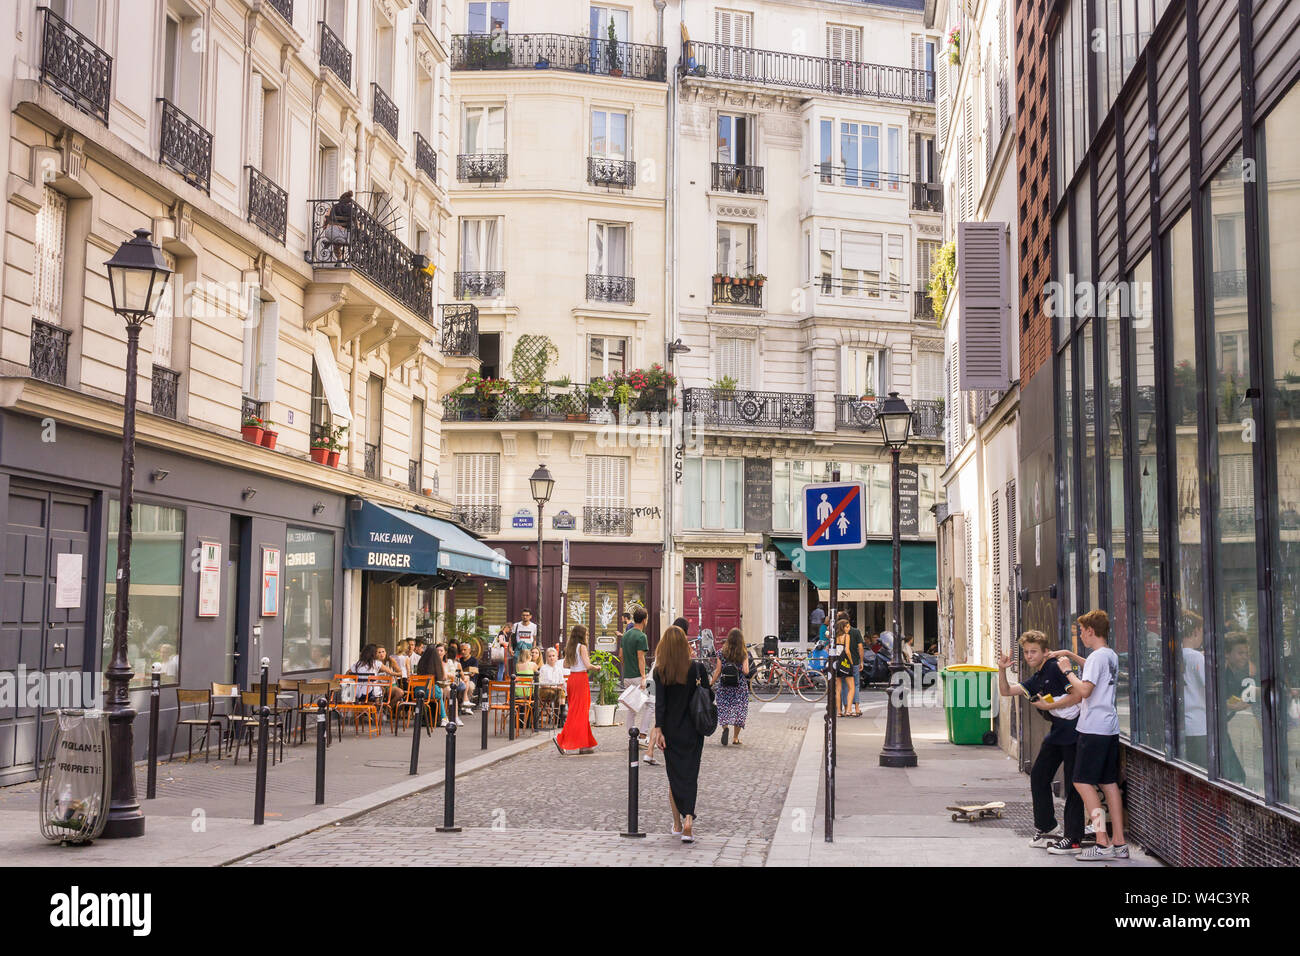 Paris street scene - 10th arrondissement on a Sunday afternoon, France, Europe. Stock Photo